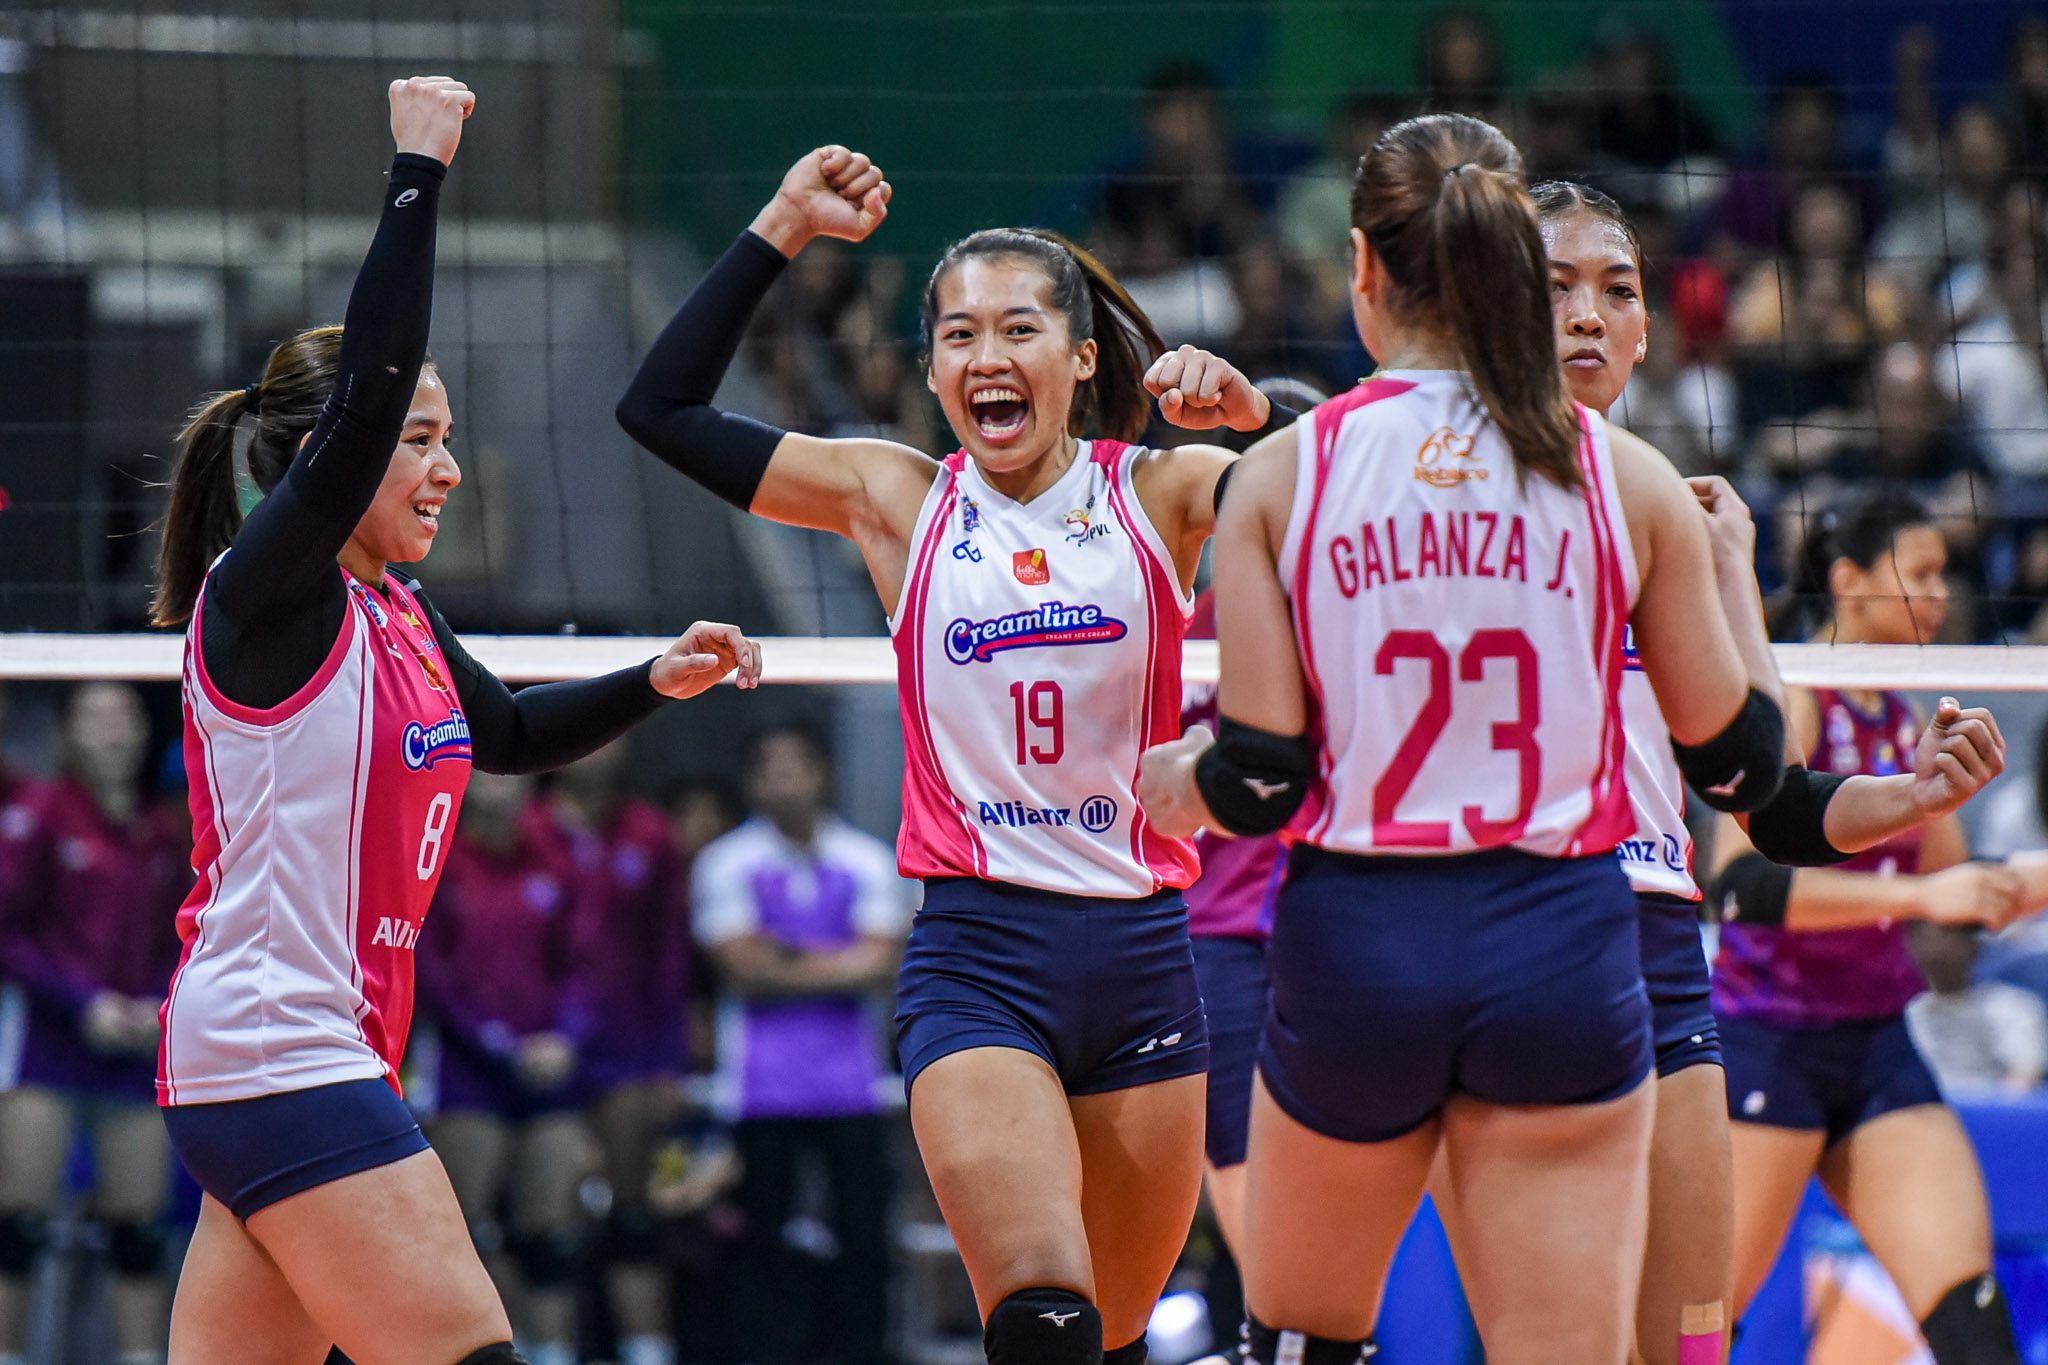 Undermanned Creamline reasserts mastery over Choco Mucho in 9th straight face-off win